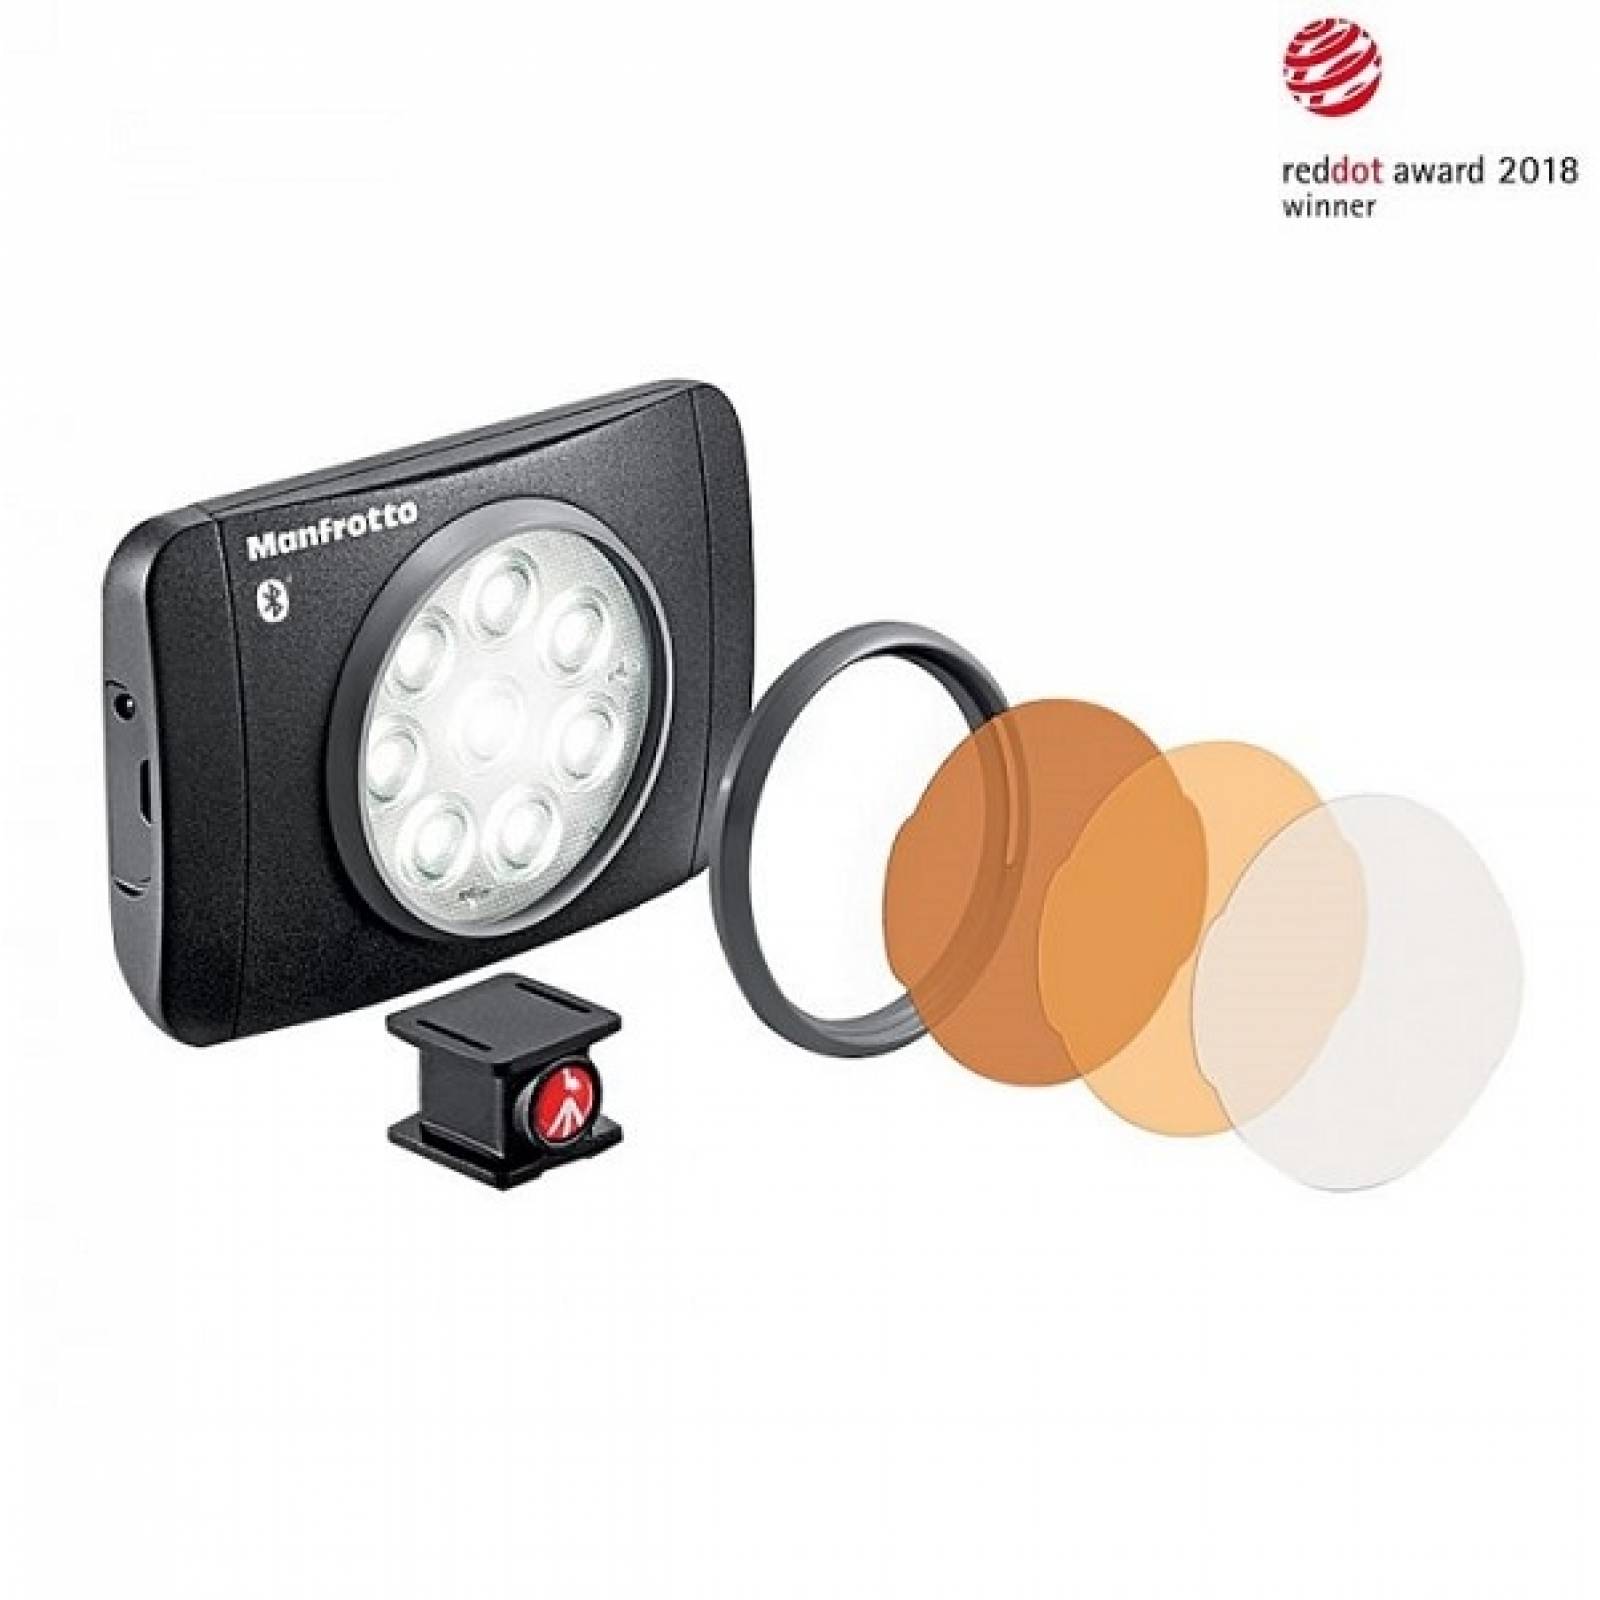 Lampara LED Bluetooth Manfrotto Serie Lumie MLUMIMUSE8A-BT